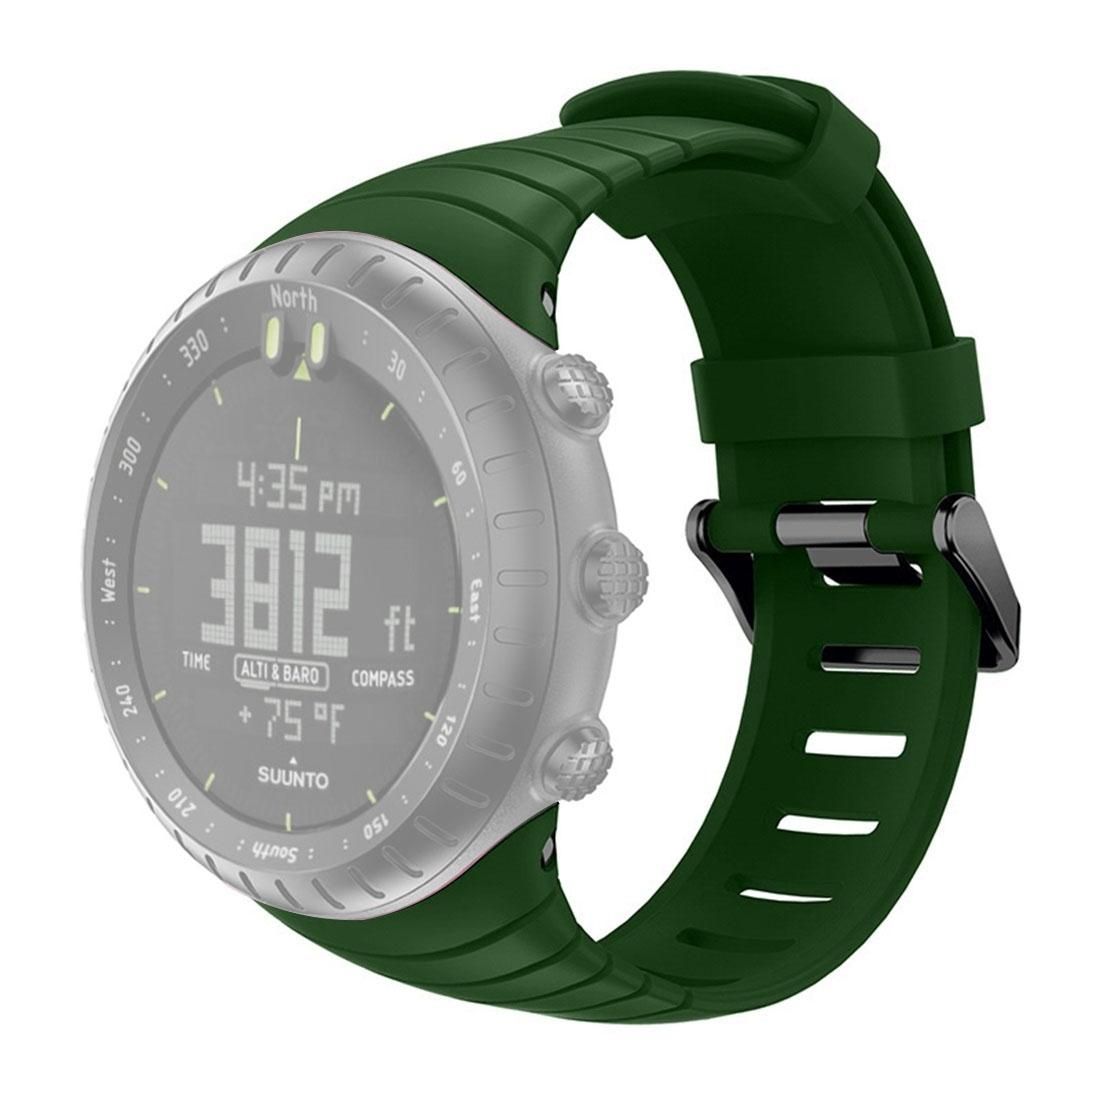 Smart Watch Silicone Wrist Strap Watchband for Suunto Core (Army Green)